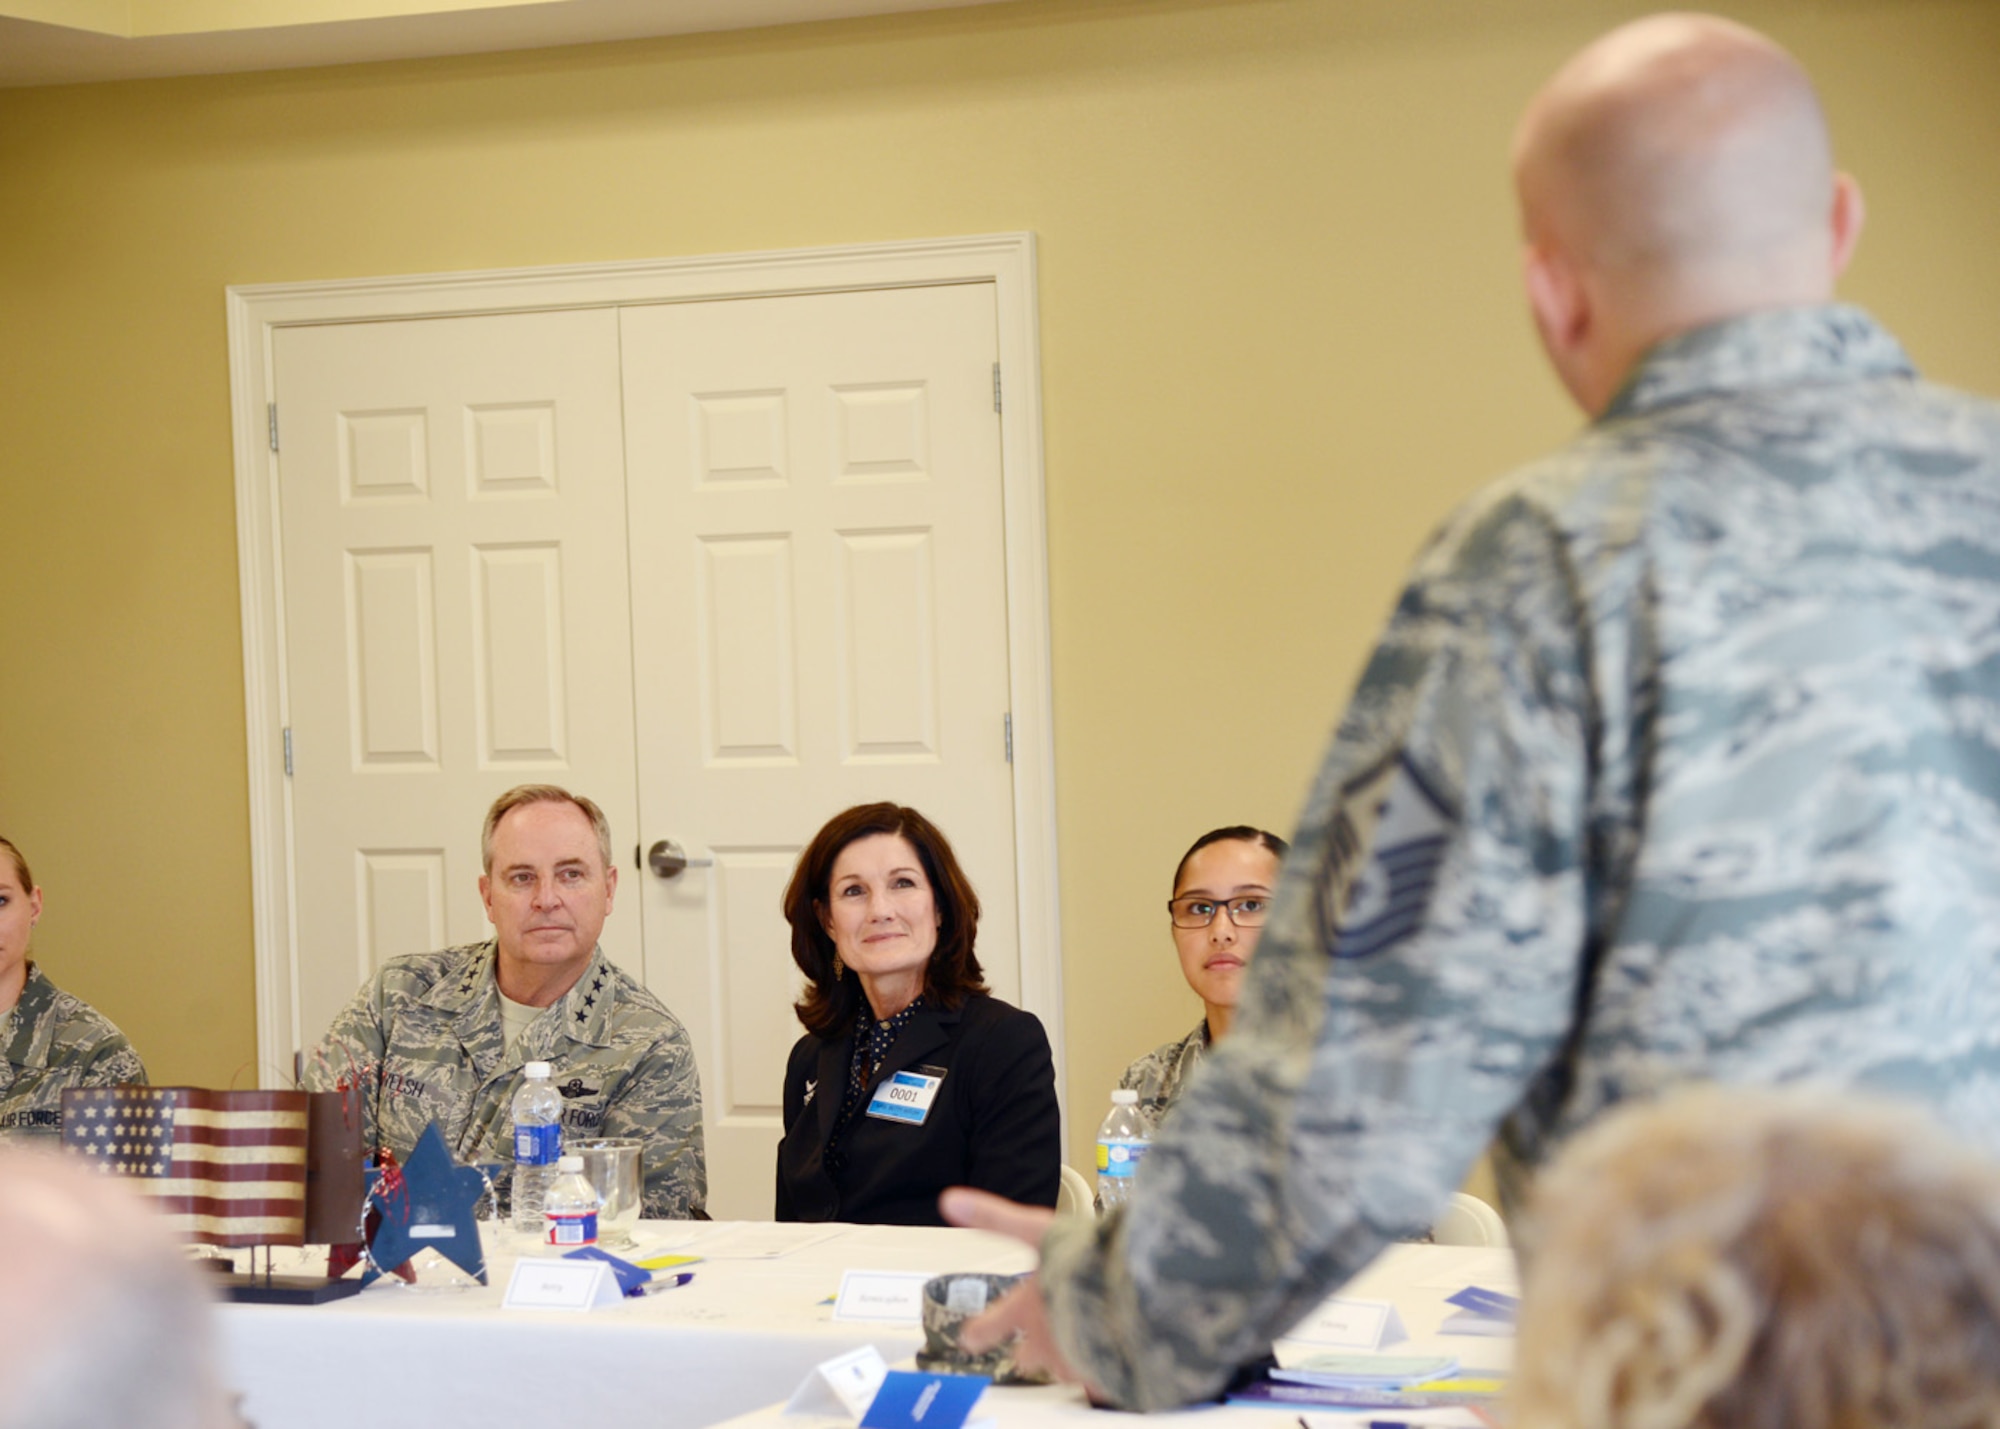 Air Force Chief of Staff Gen. Mark A. Welsh III and his wife, Betty, listen to firsthand testimonial from Airmen across Tinker Air Force Base, Okla., during a resiliency roundtable April 9, 2015. (U.S. Air Force photo/Kelly White)